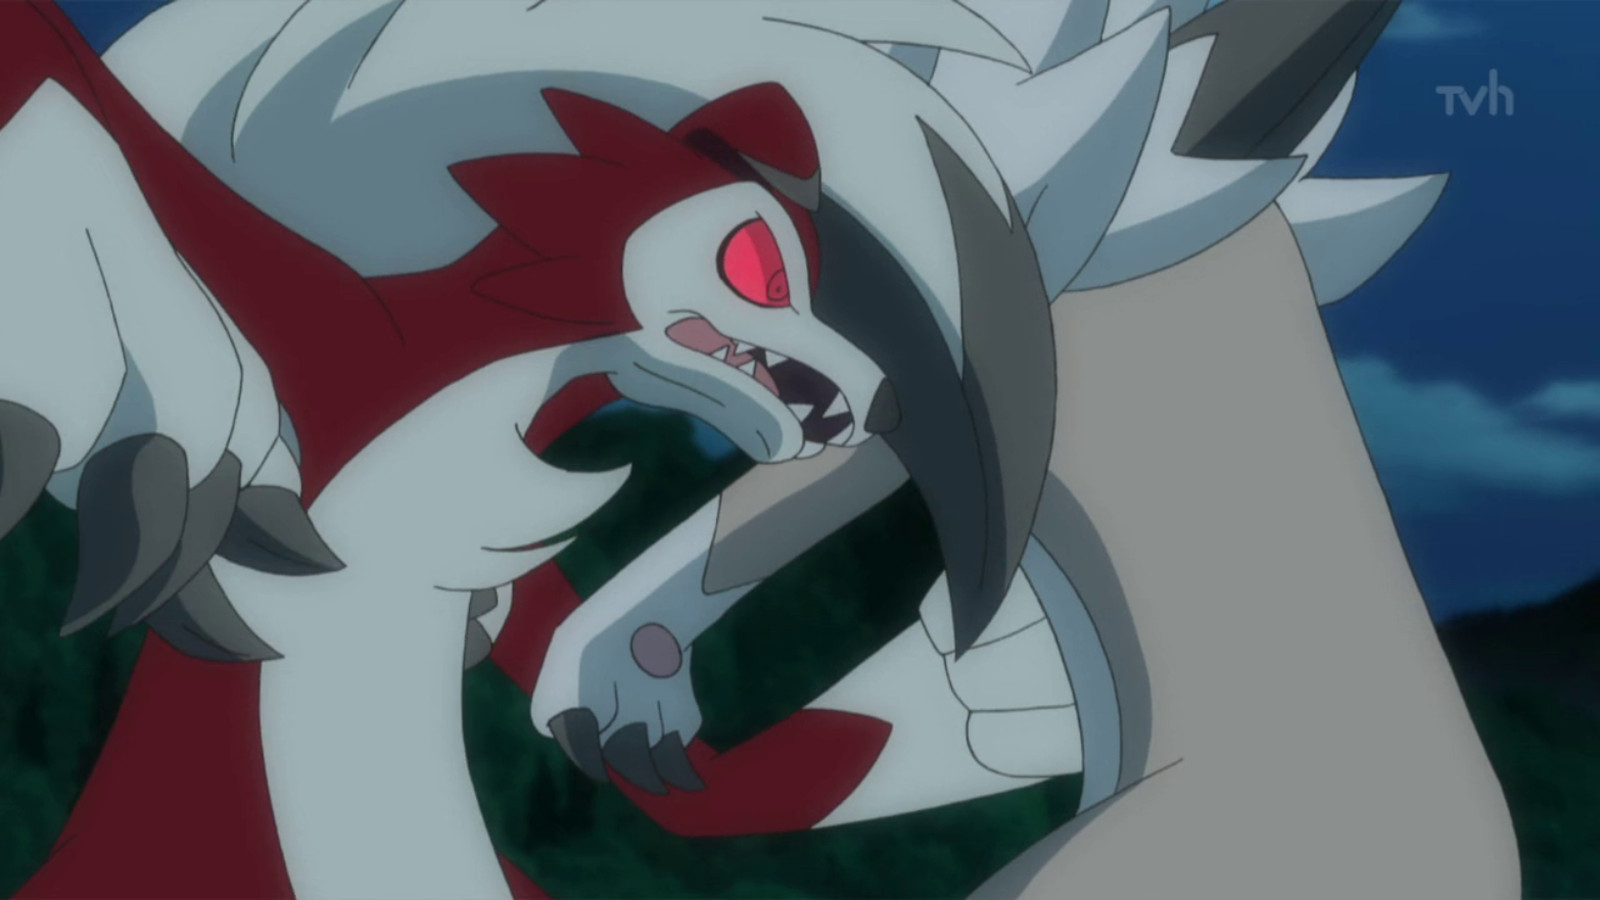 lycanroc all forms